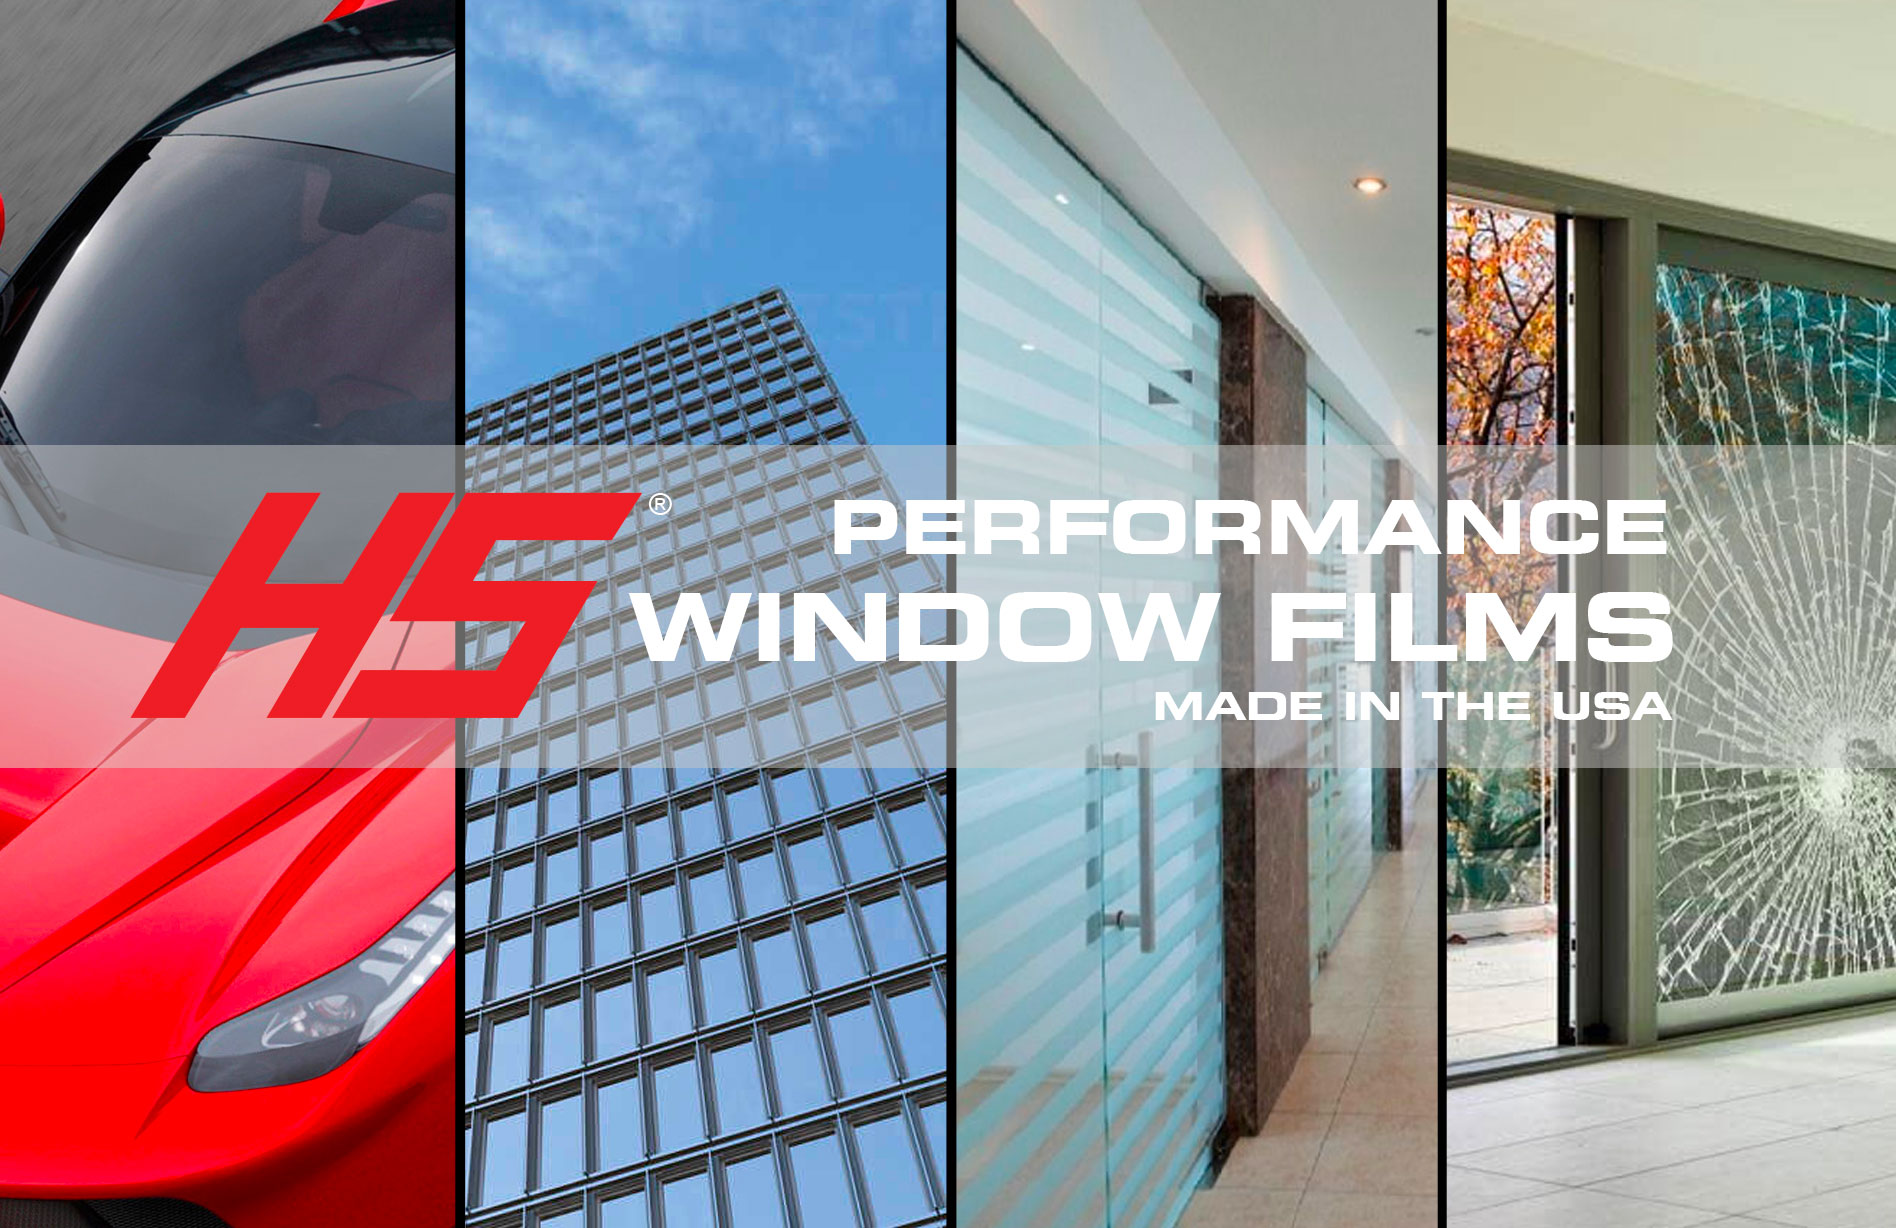 HS-WINDOW-FILMS-BANNER-WITH-LOGO